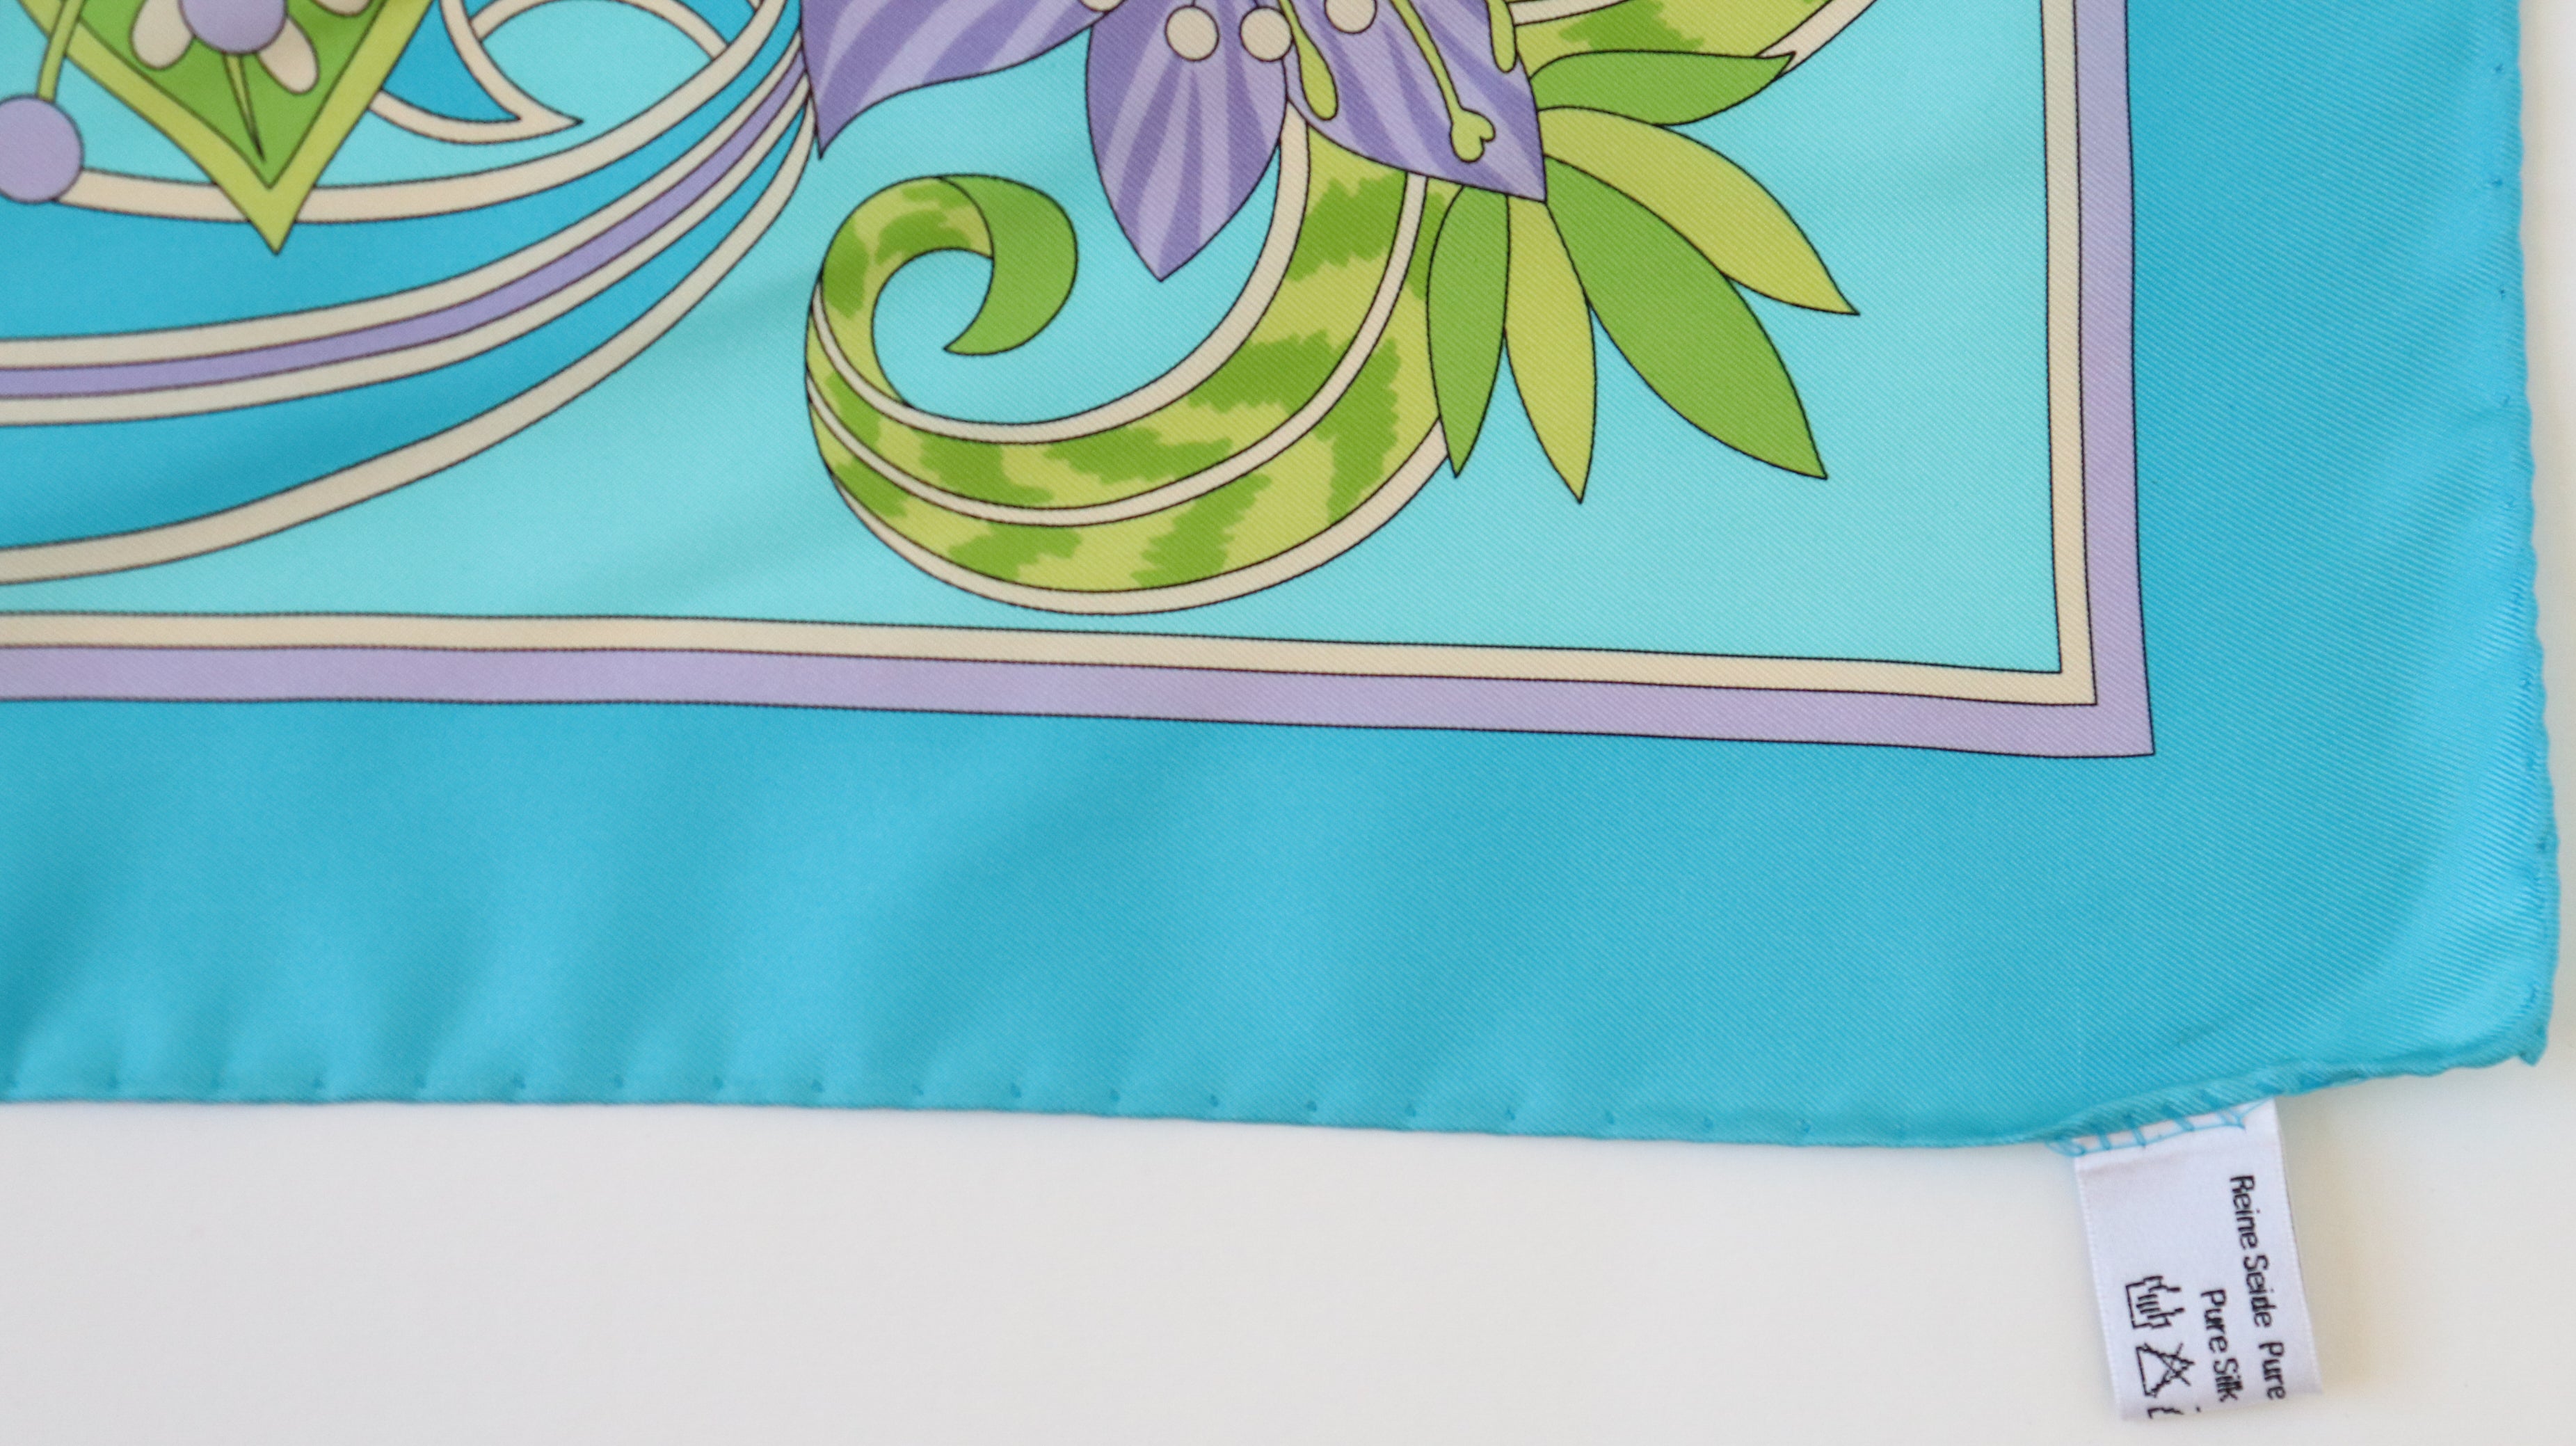 Jammers & Leufgen Psychedelic Floral  Silk Scarf - Turquoise Blue - Large